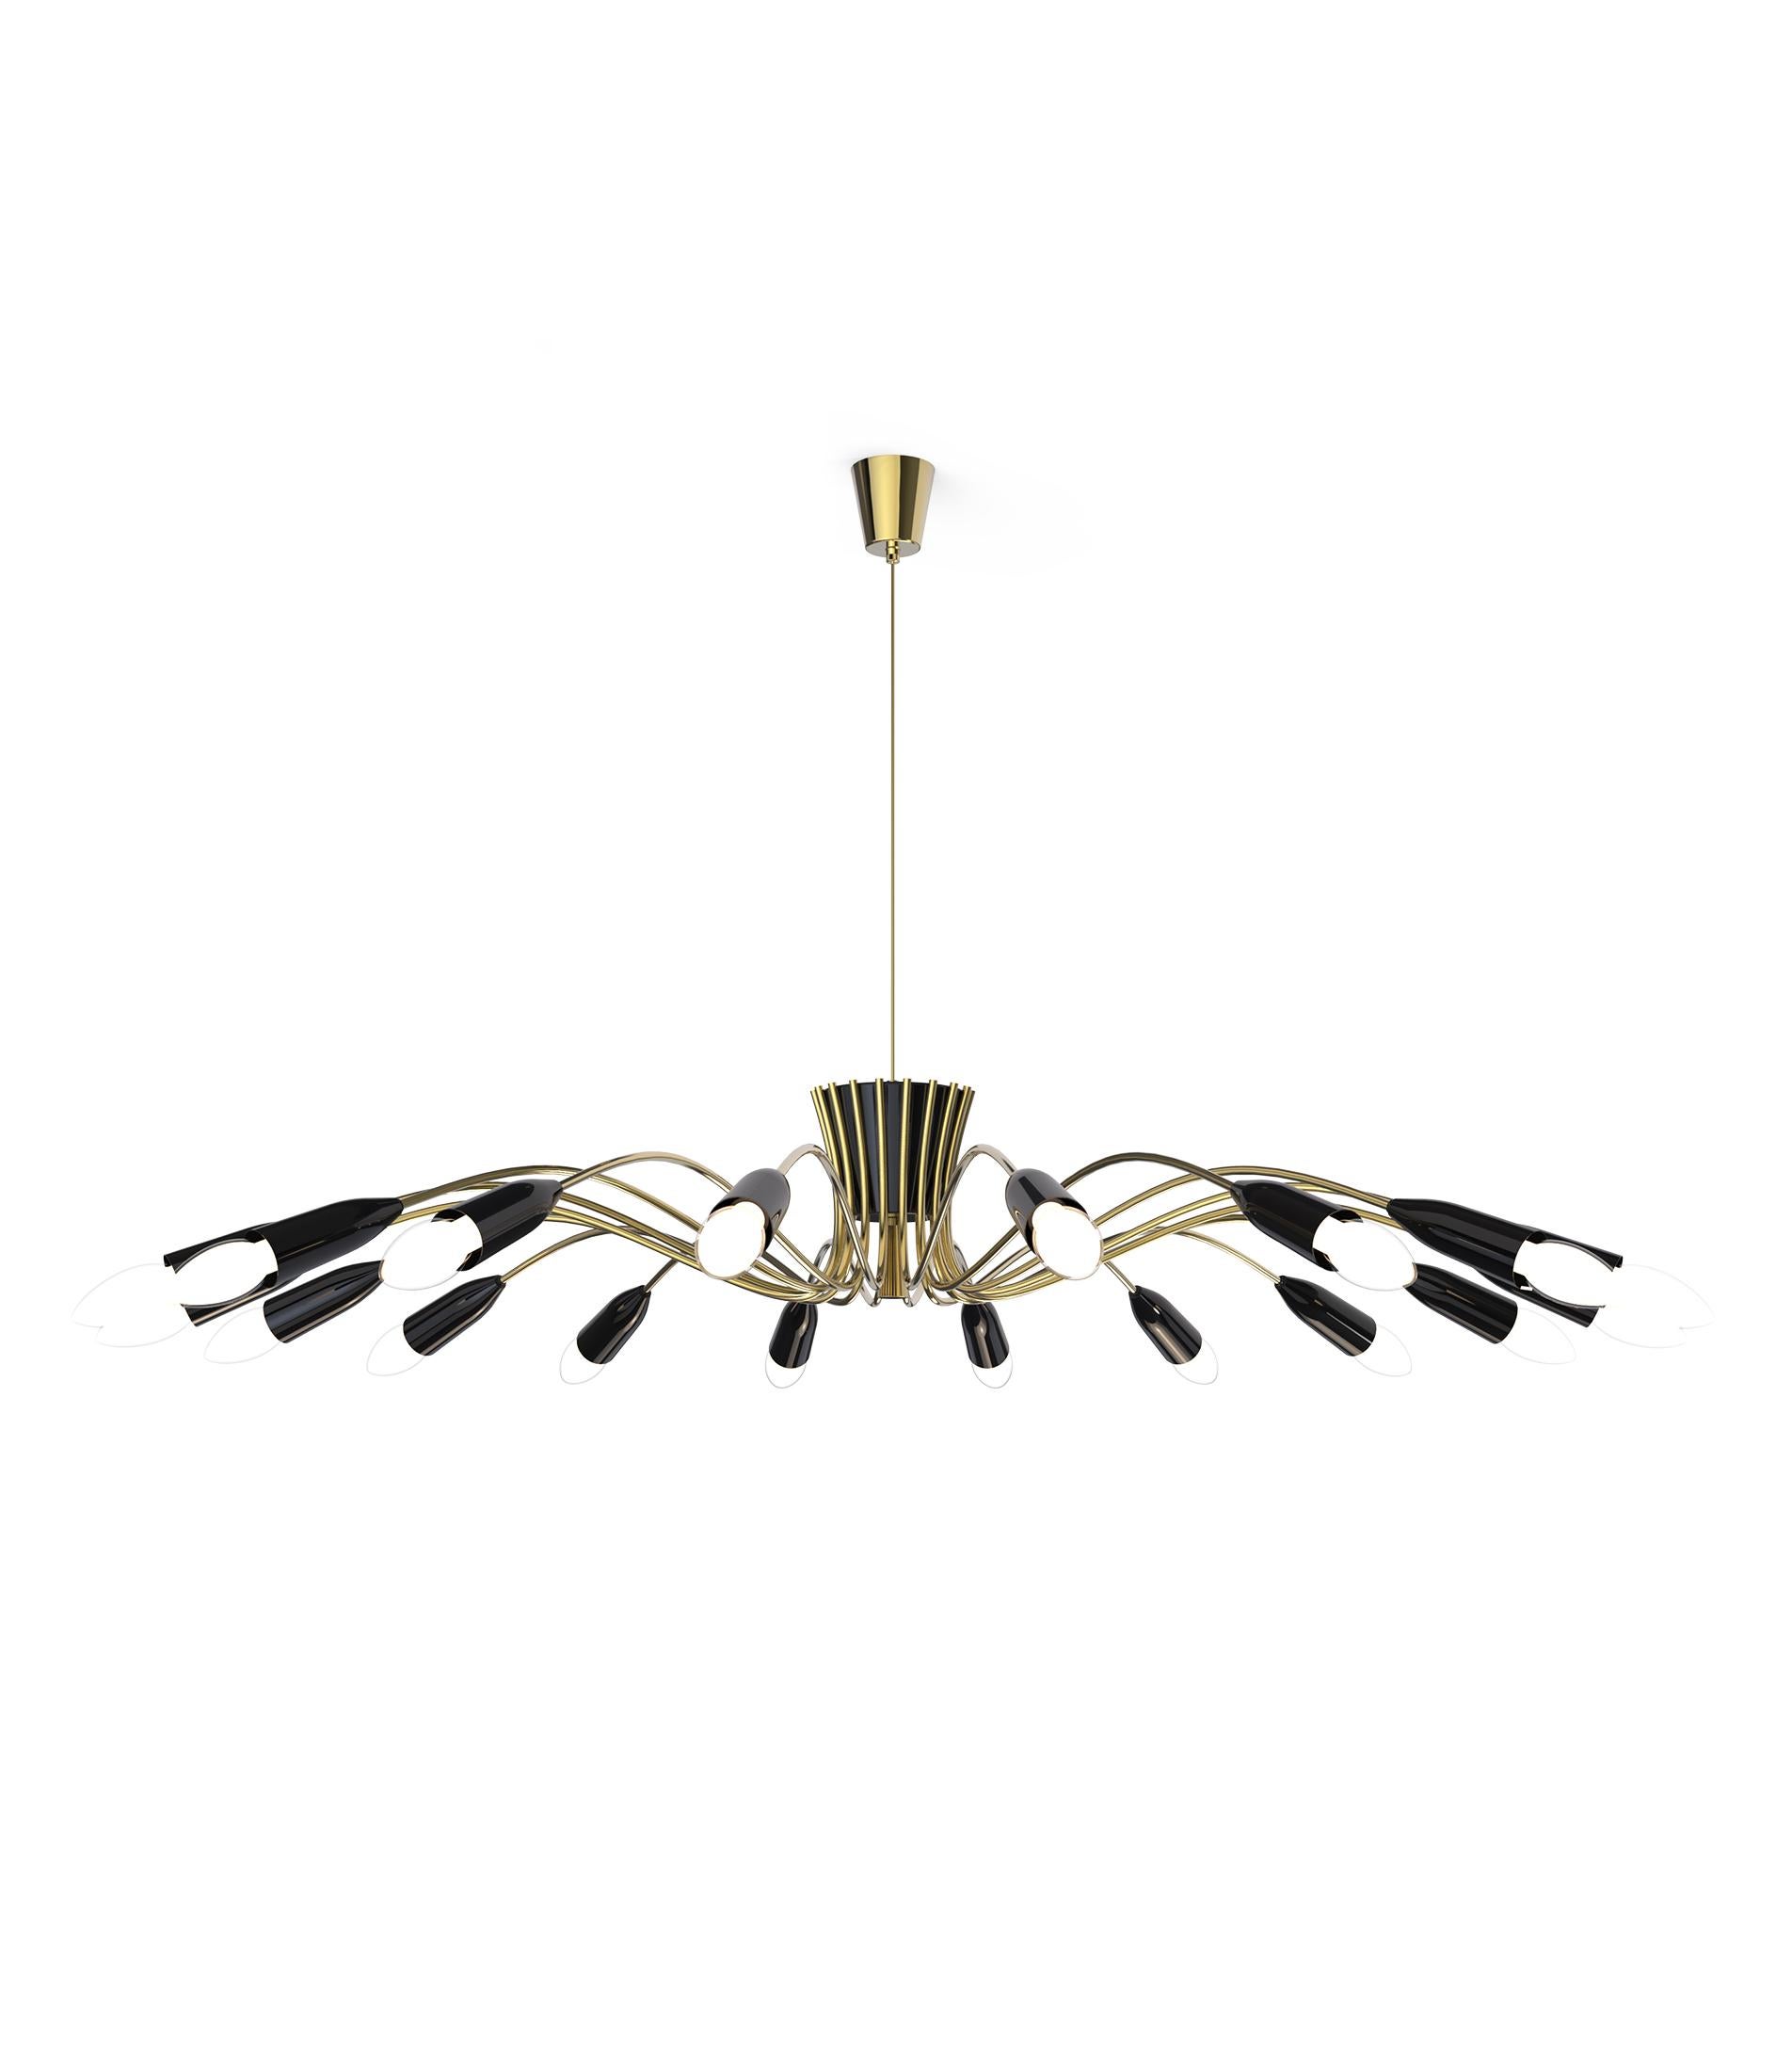 Norah is a Mid-Century Modern lighting design that was inspired by the 50s decor. This modern Sputnik chandelier light is the perfect combination of a Mid-Century Modern design and a Minimalist design. The standout feature on this 17-light brass